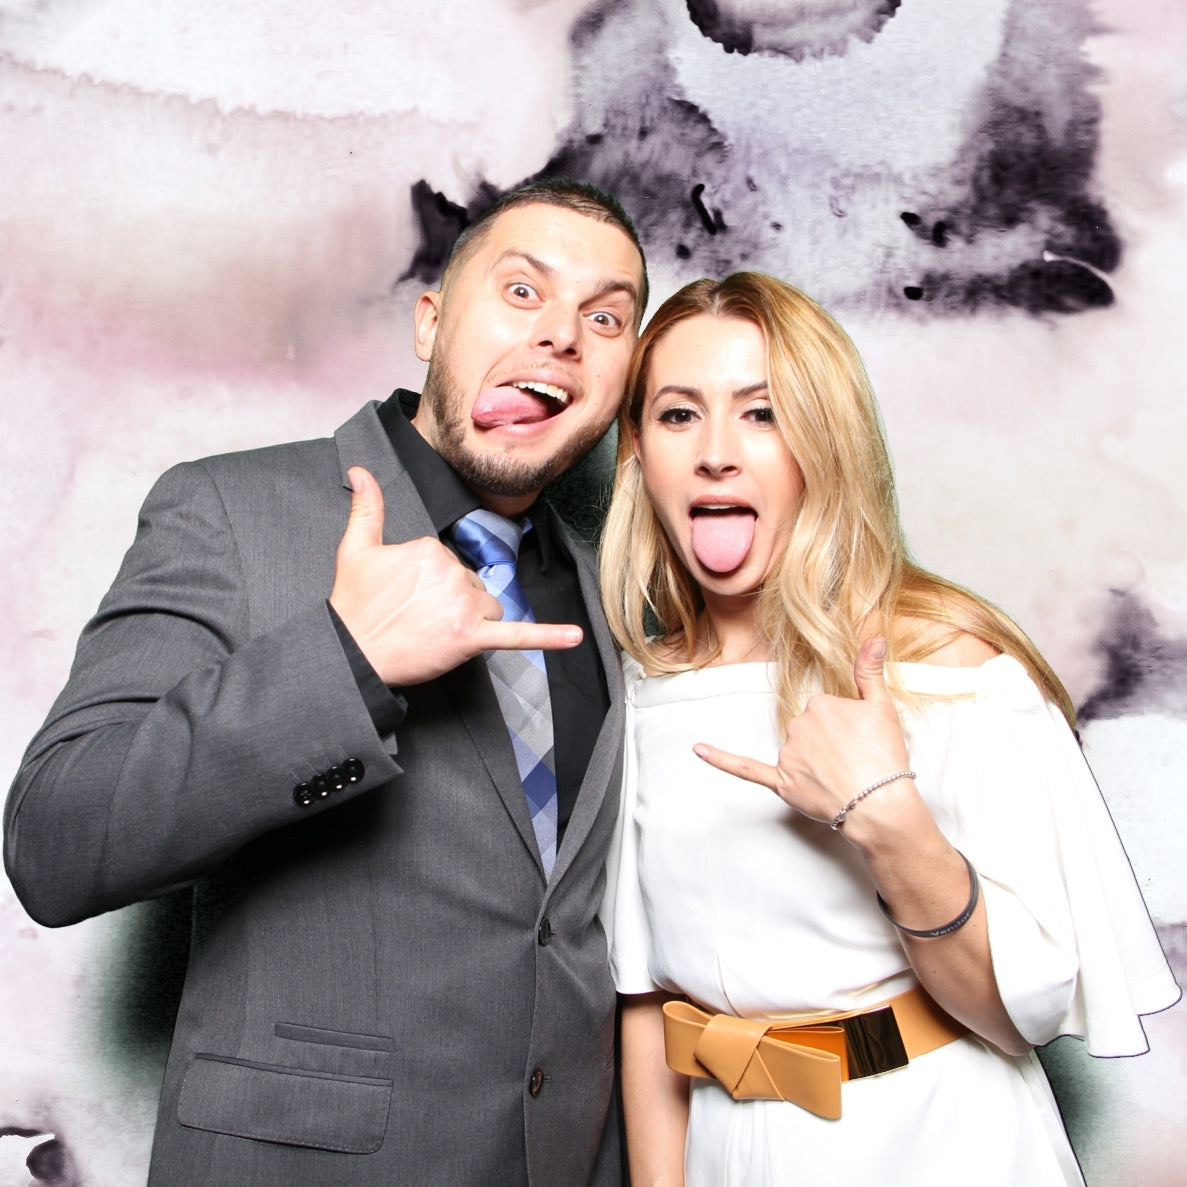 Man in grey suit and woman in white dress with belt posting for photo sticking out their tongue and both holding up one hand